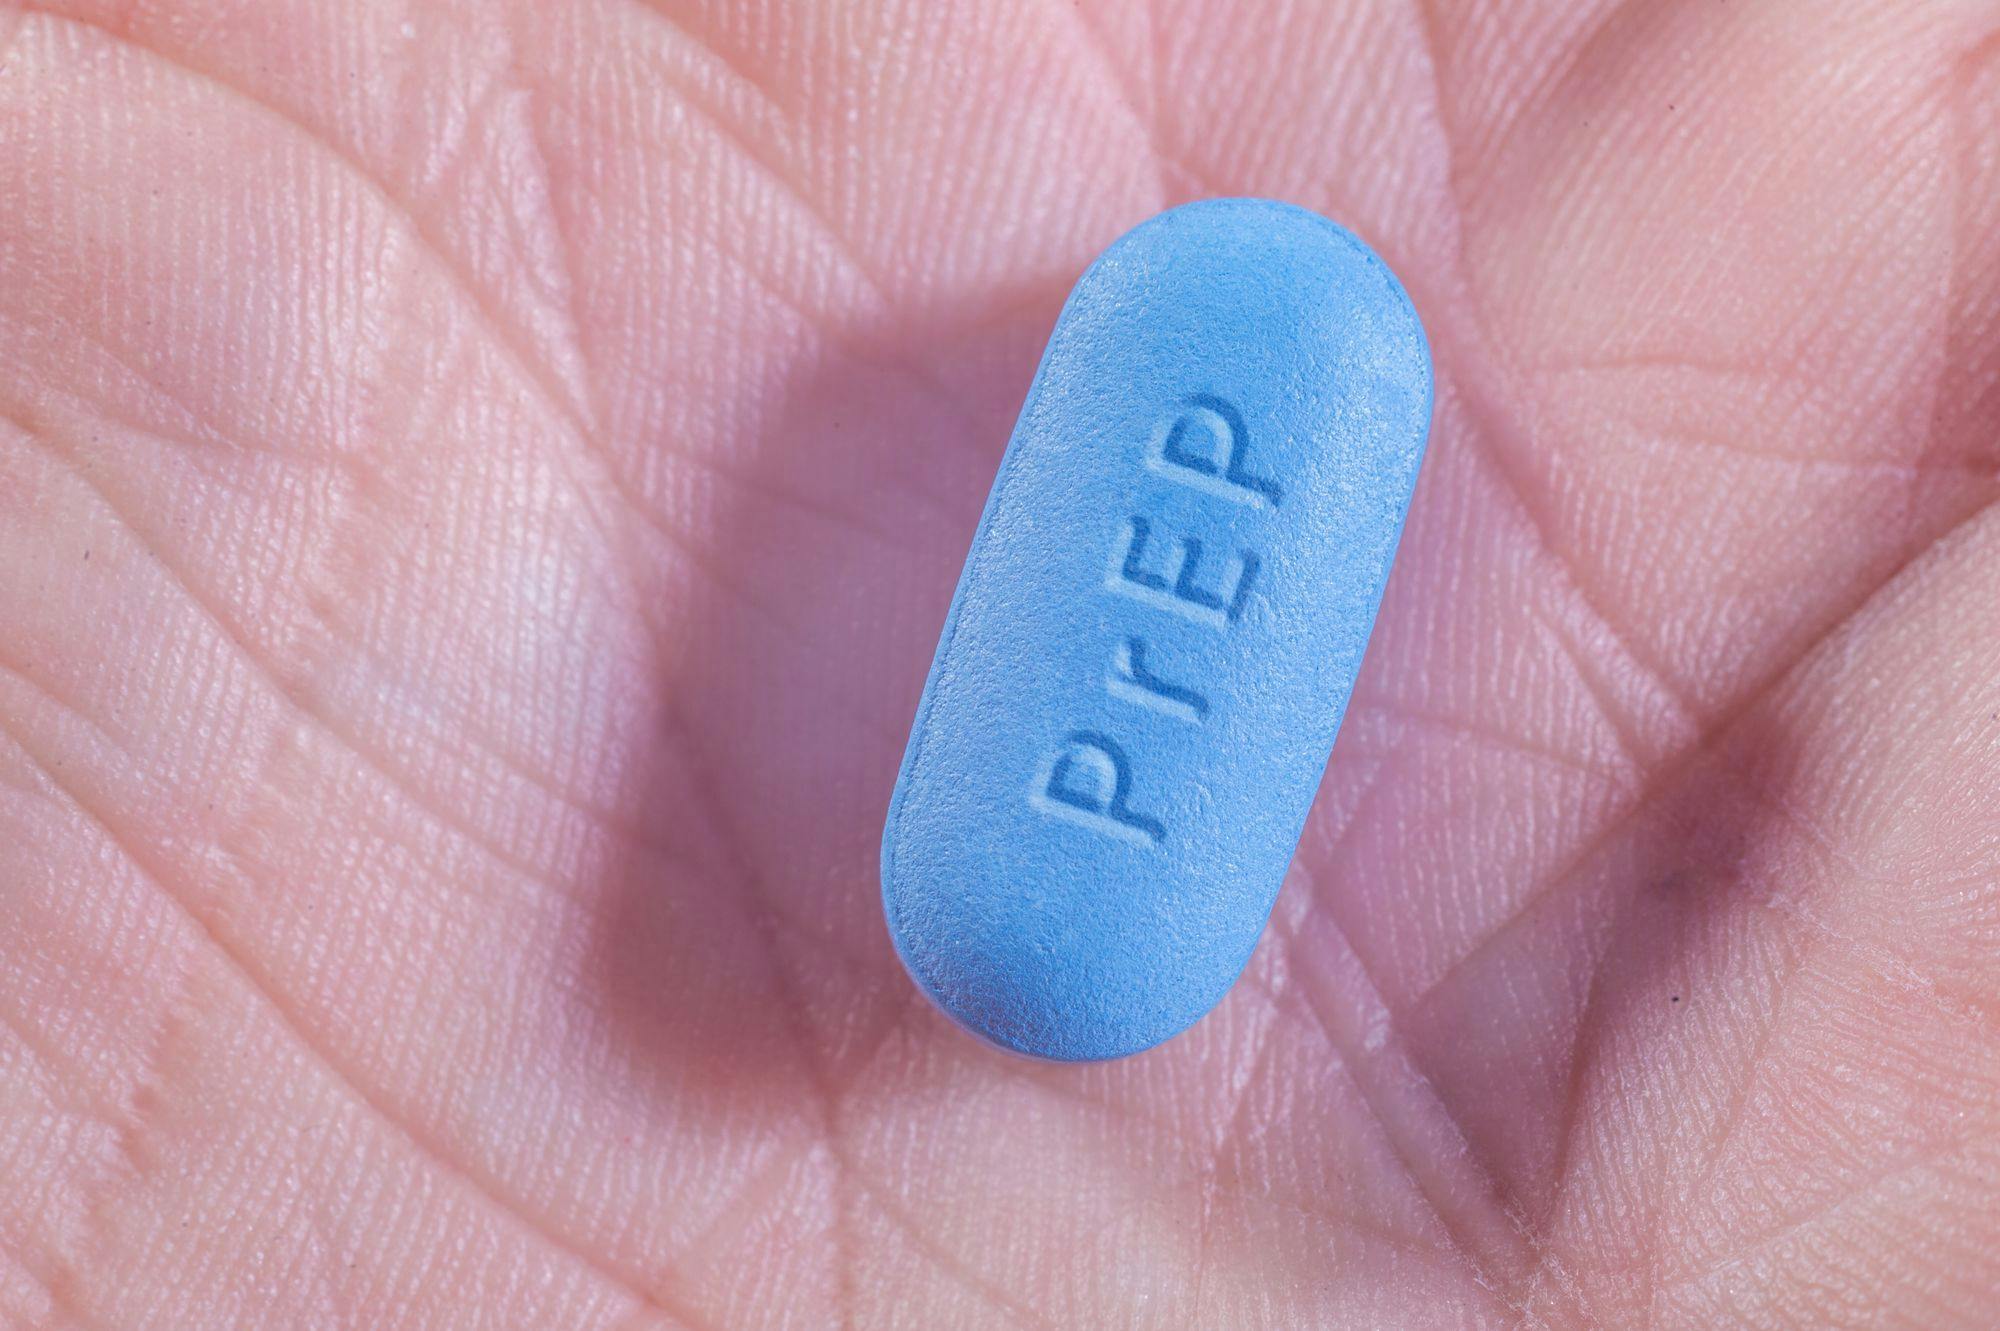 Study: Financial Incentives Increase PrEP Initiation, Adherence for HIV